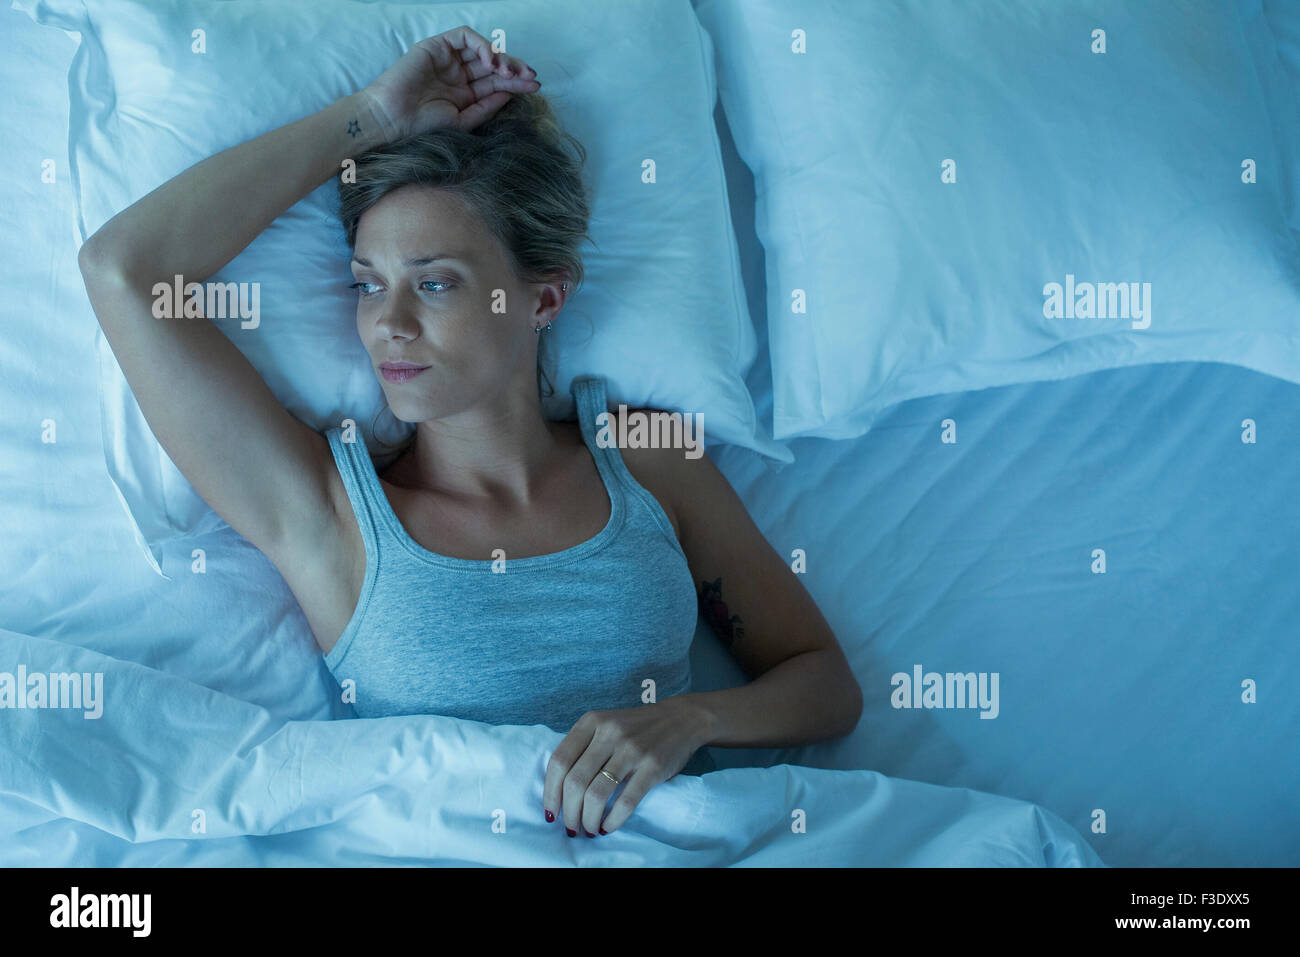 Woman lying alone in bed, looking away in thought Stock Photo